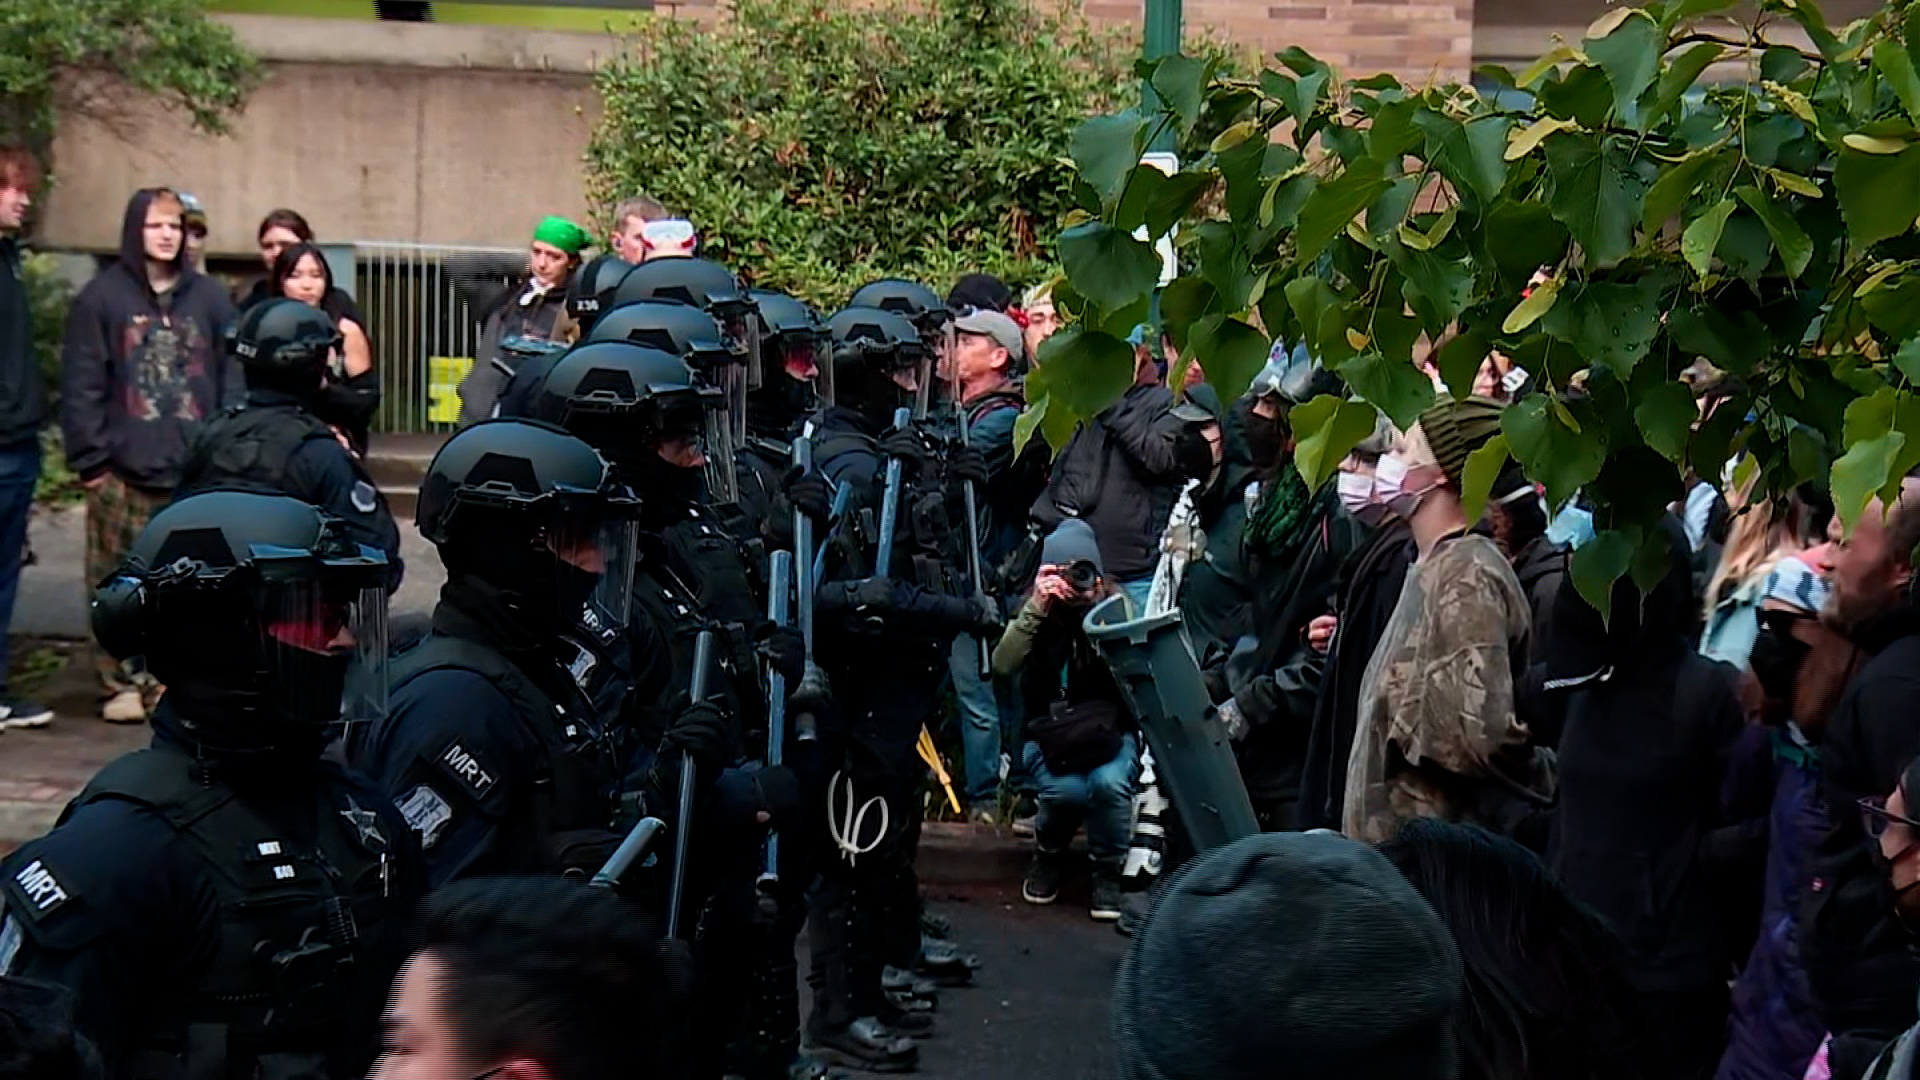 Portland police standoff with protesters at Portland State University on Thursday.